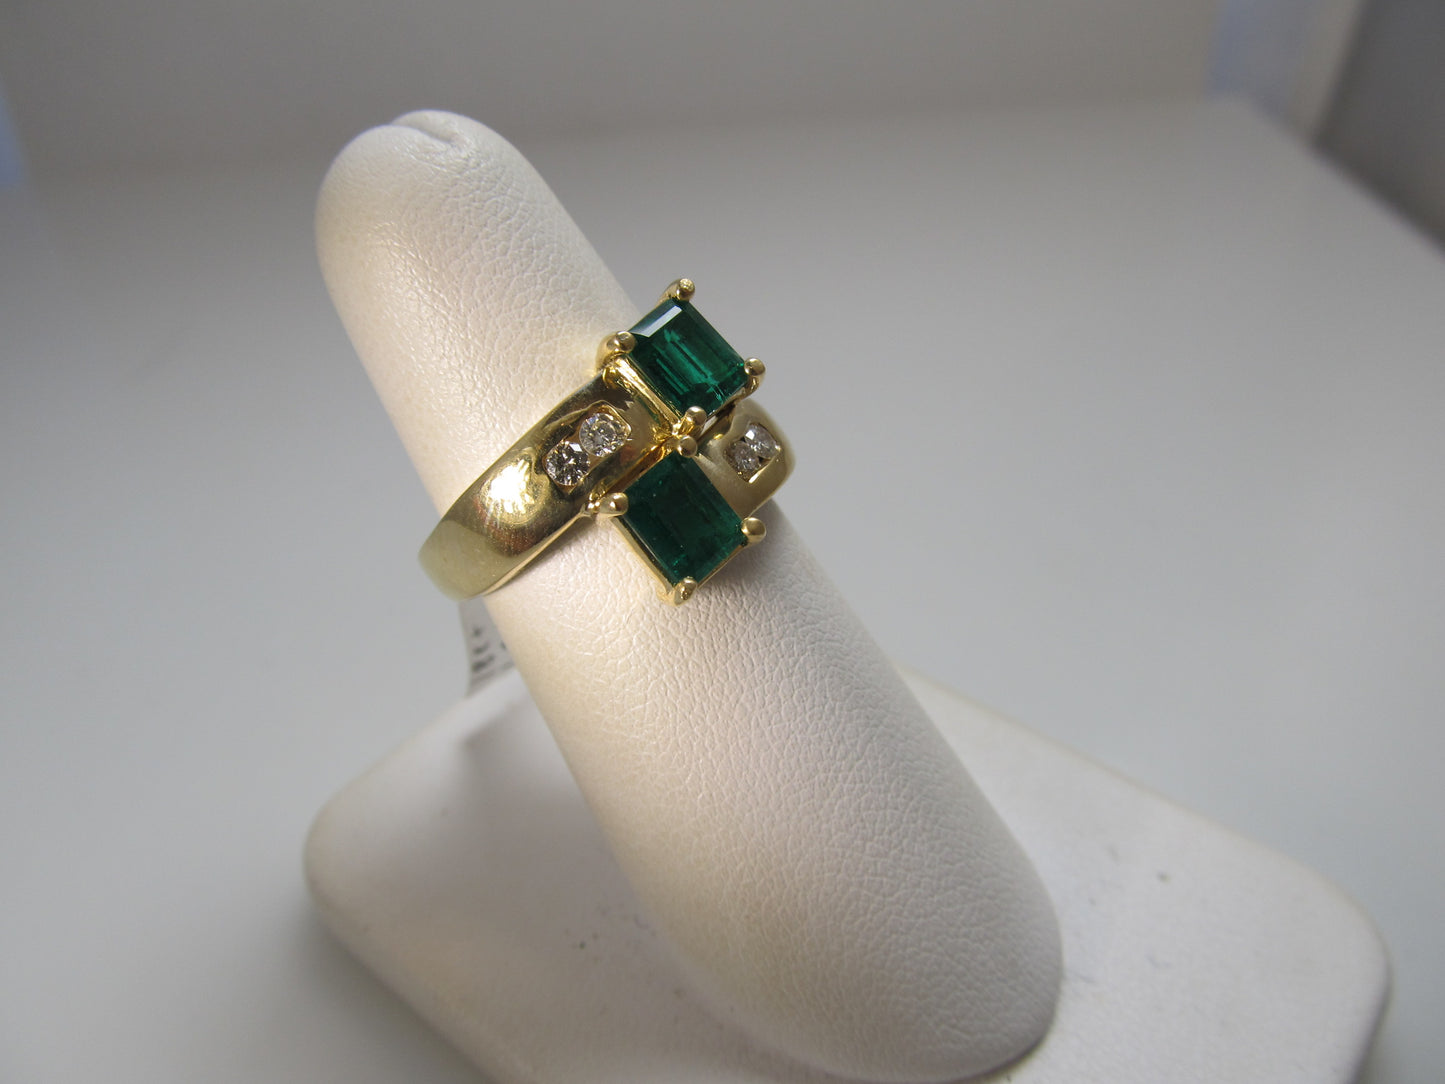 Emerald and diamond bypass ring